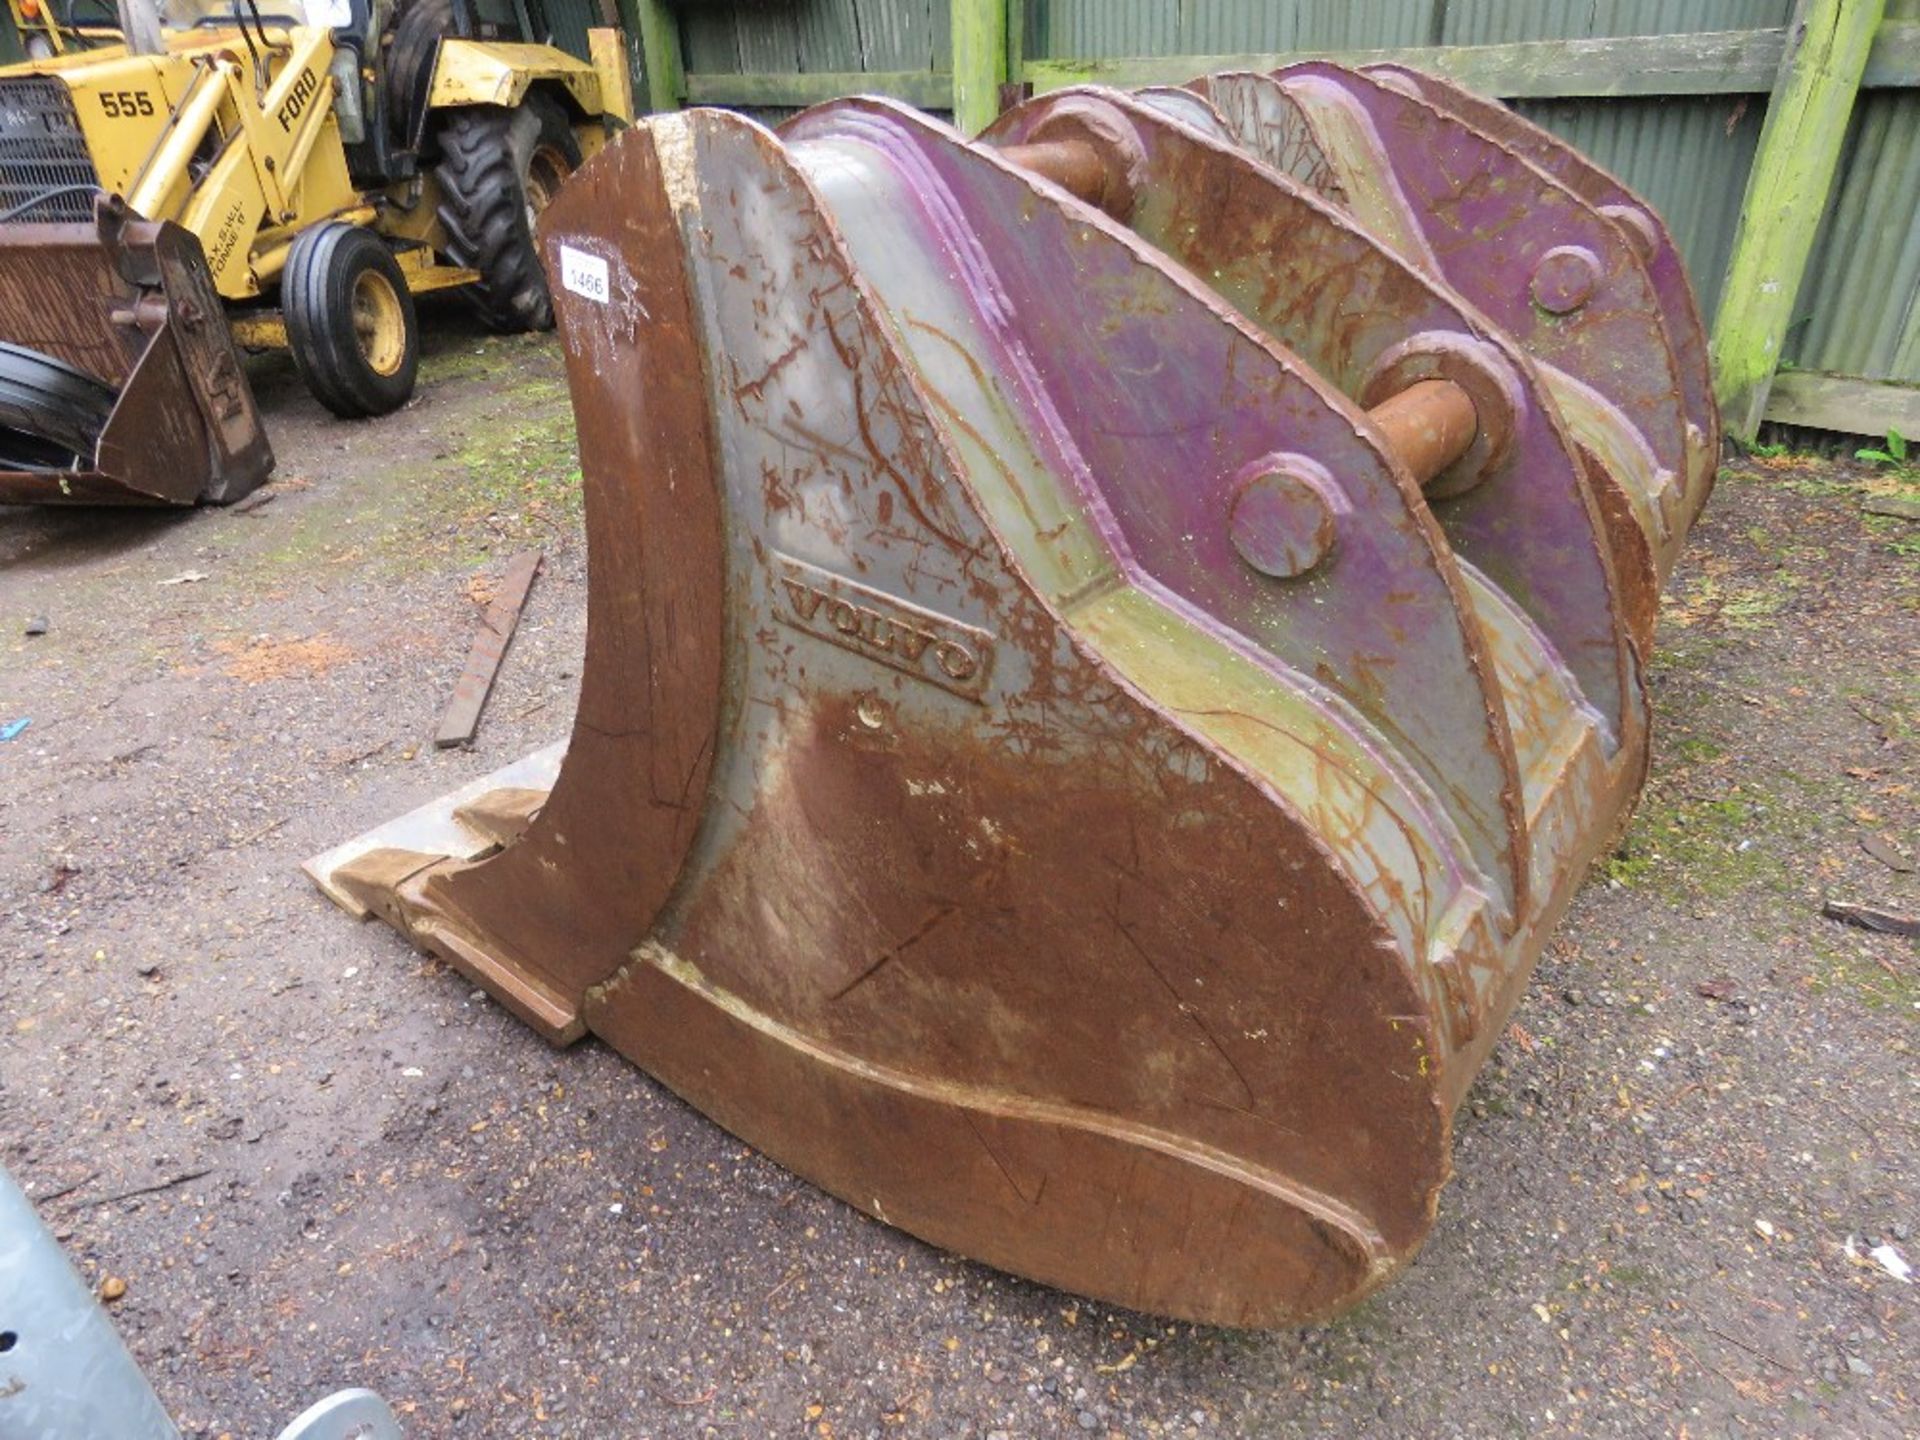 GENUINE VOLVO EXCAVATOR BUCKET SUITABLE FOR 35TONNE EXCAVATOR ON 90MM PINS. 0.9M WIDTH APPROX. APPEA - Image 3 of 4